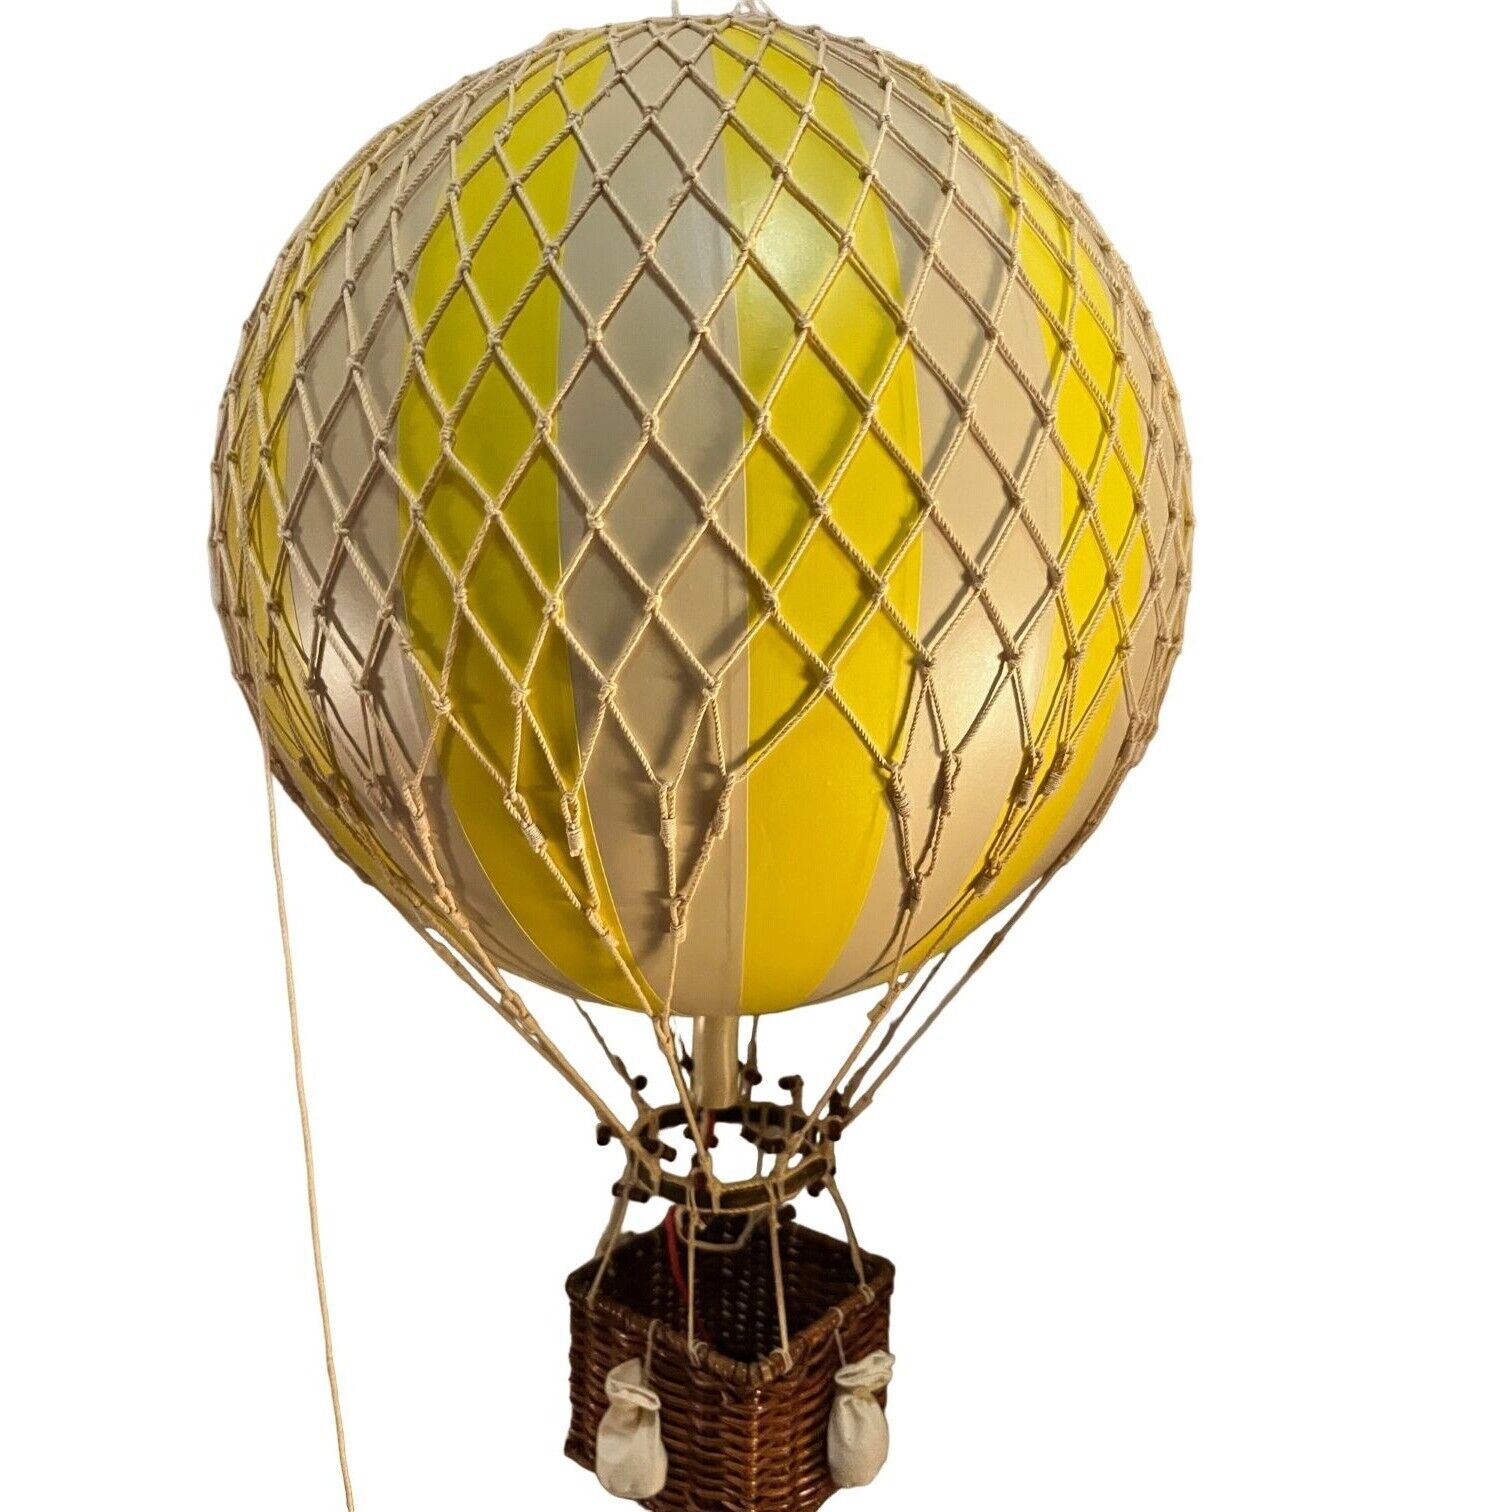 Aero Hot Air Balloon Authentic Model by Royal Designs, New in Box